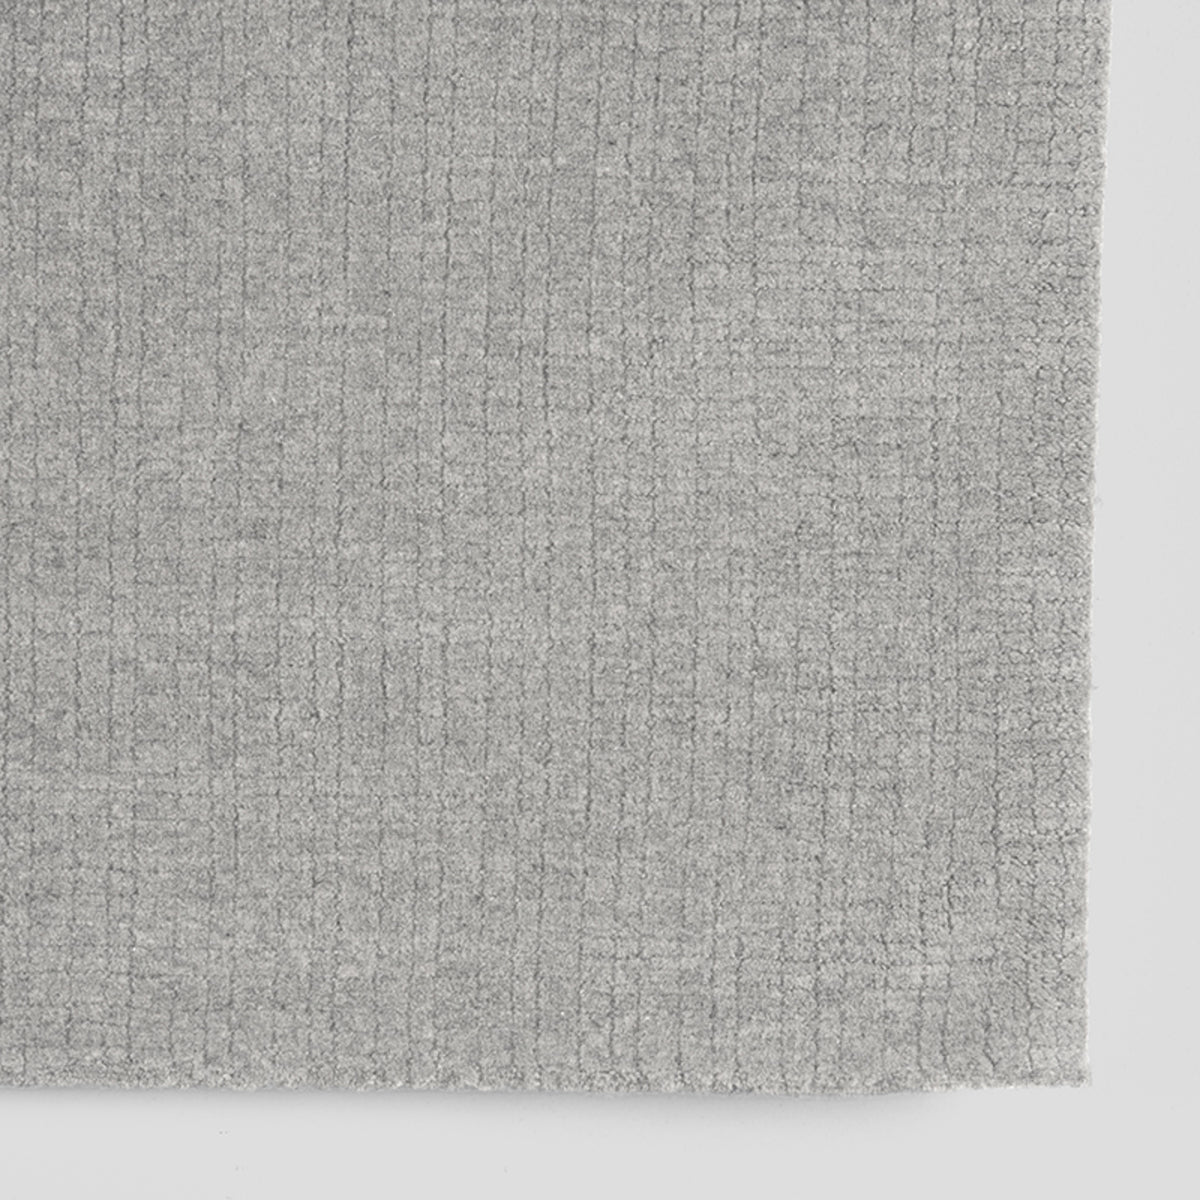 LABEL51 Rugs Wolly - Gray - Wool - 200x300 cm